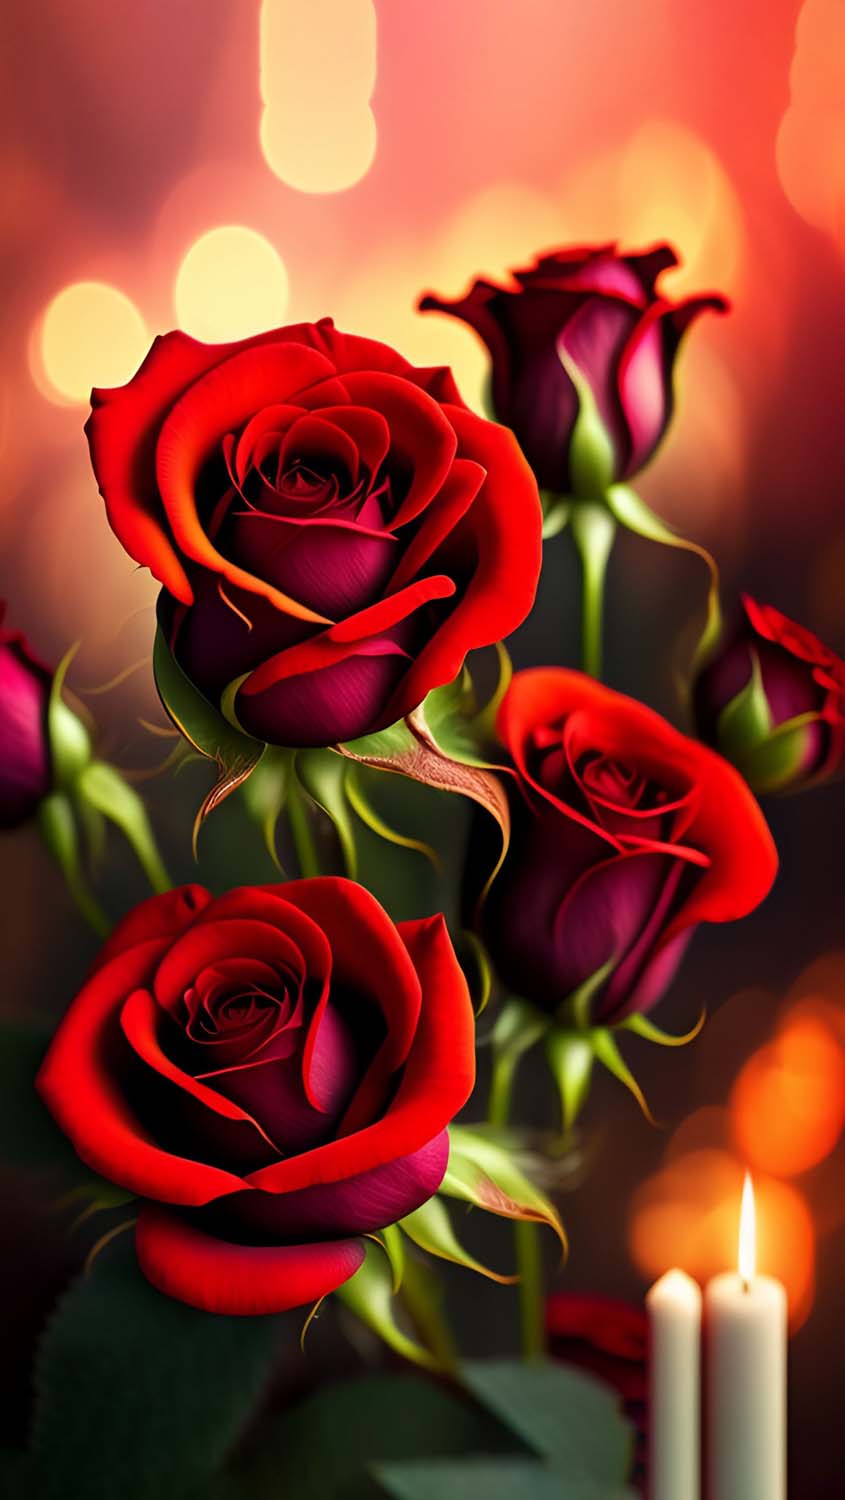 Red Roses iPhone Wallpaper HD